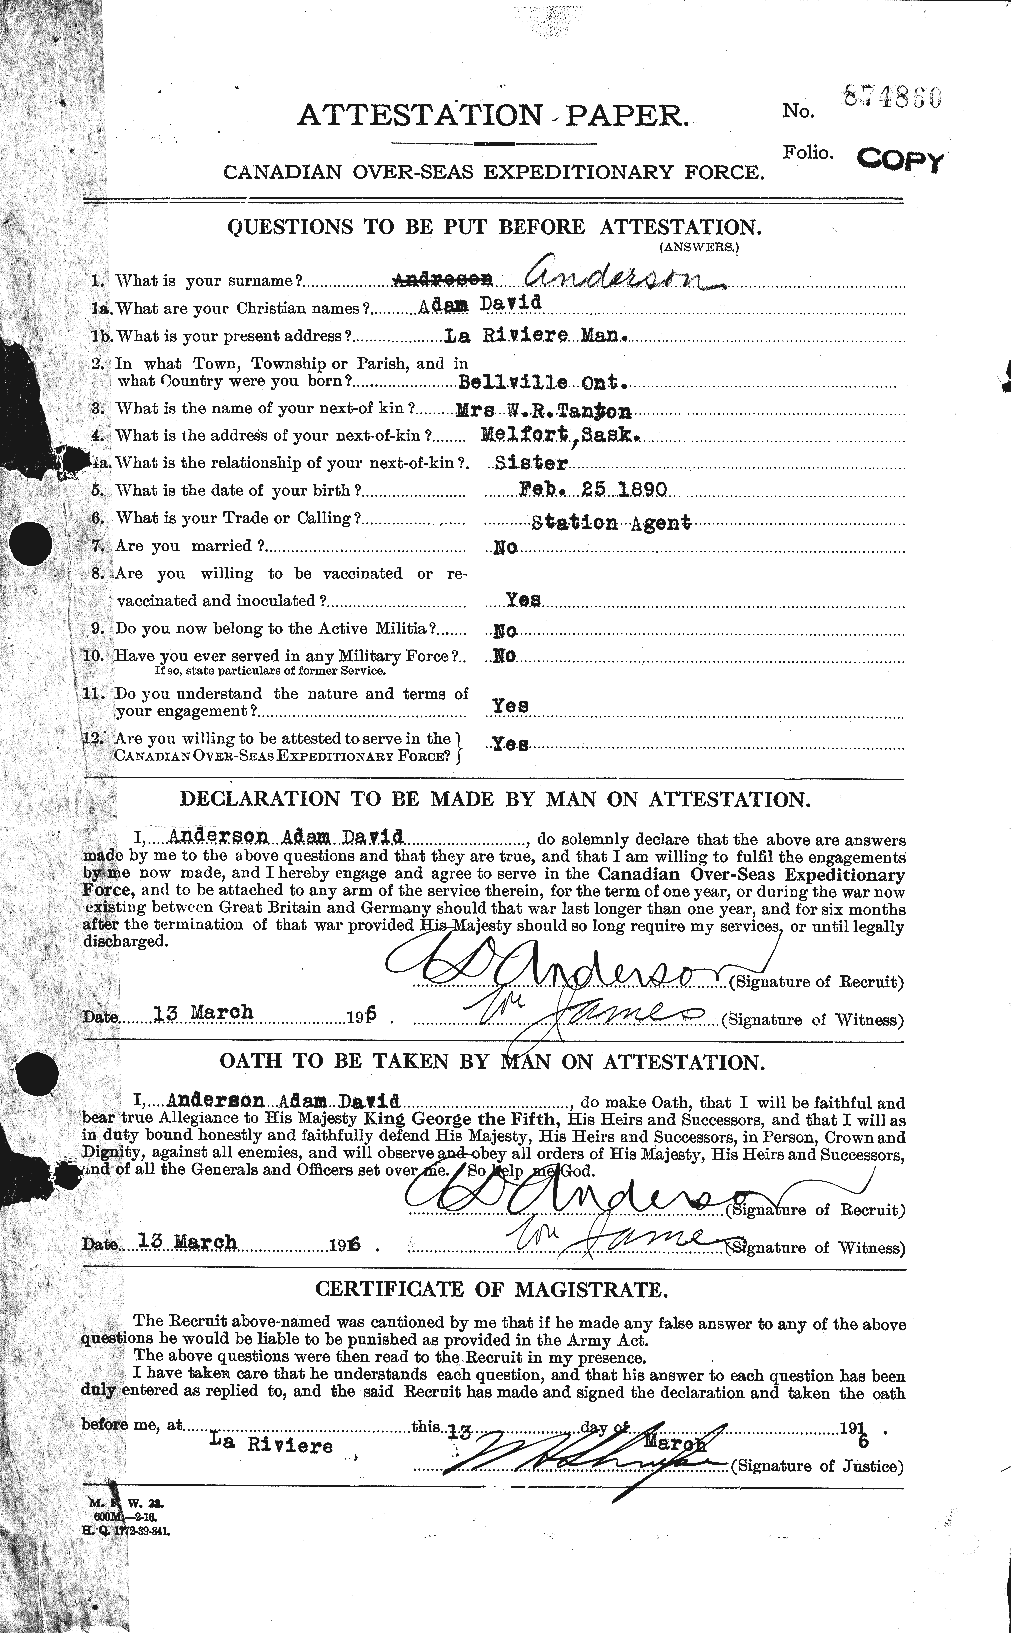 Personnel Records of the First World War - CEF 209578a